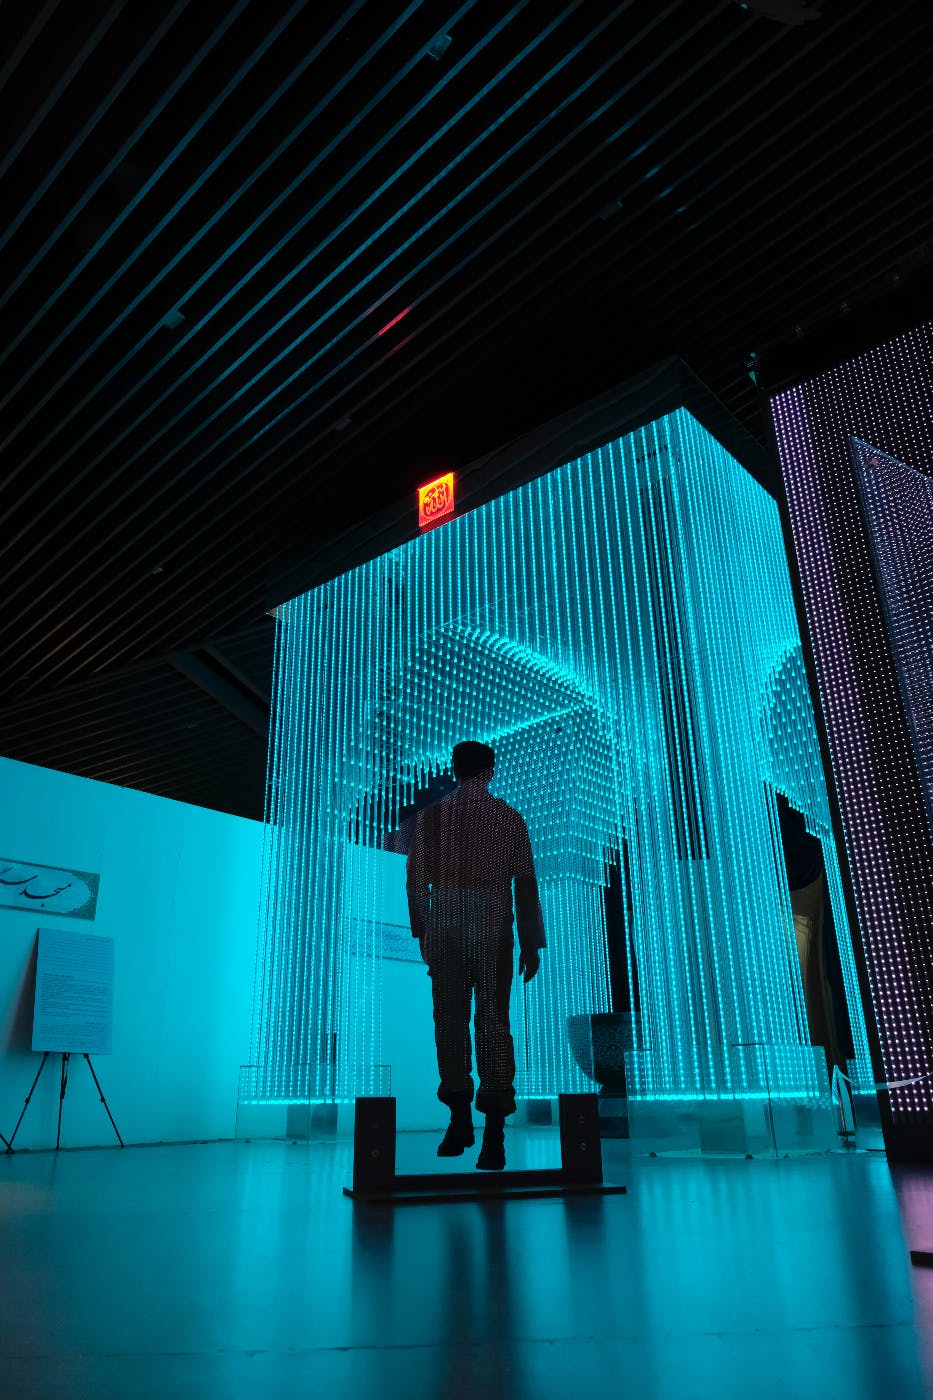 A futuristic light display with the image of a person floating in it